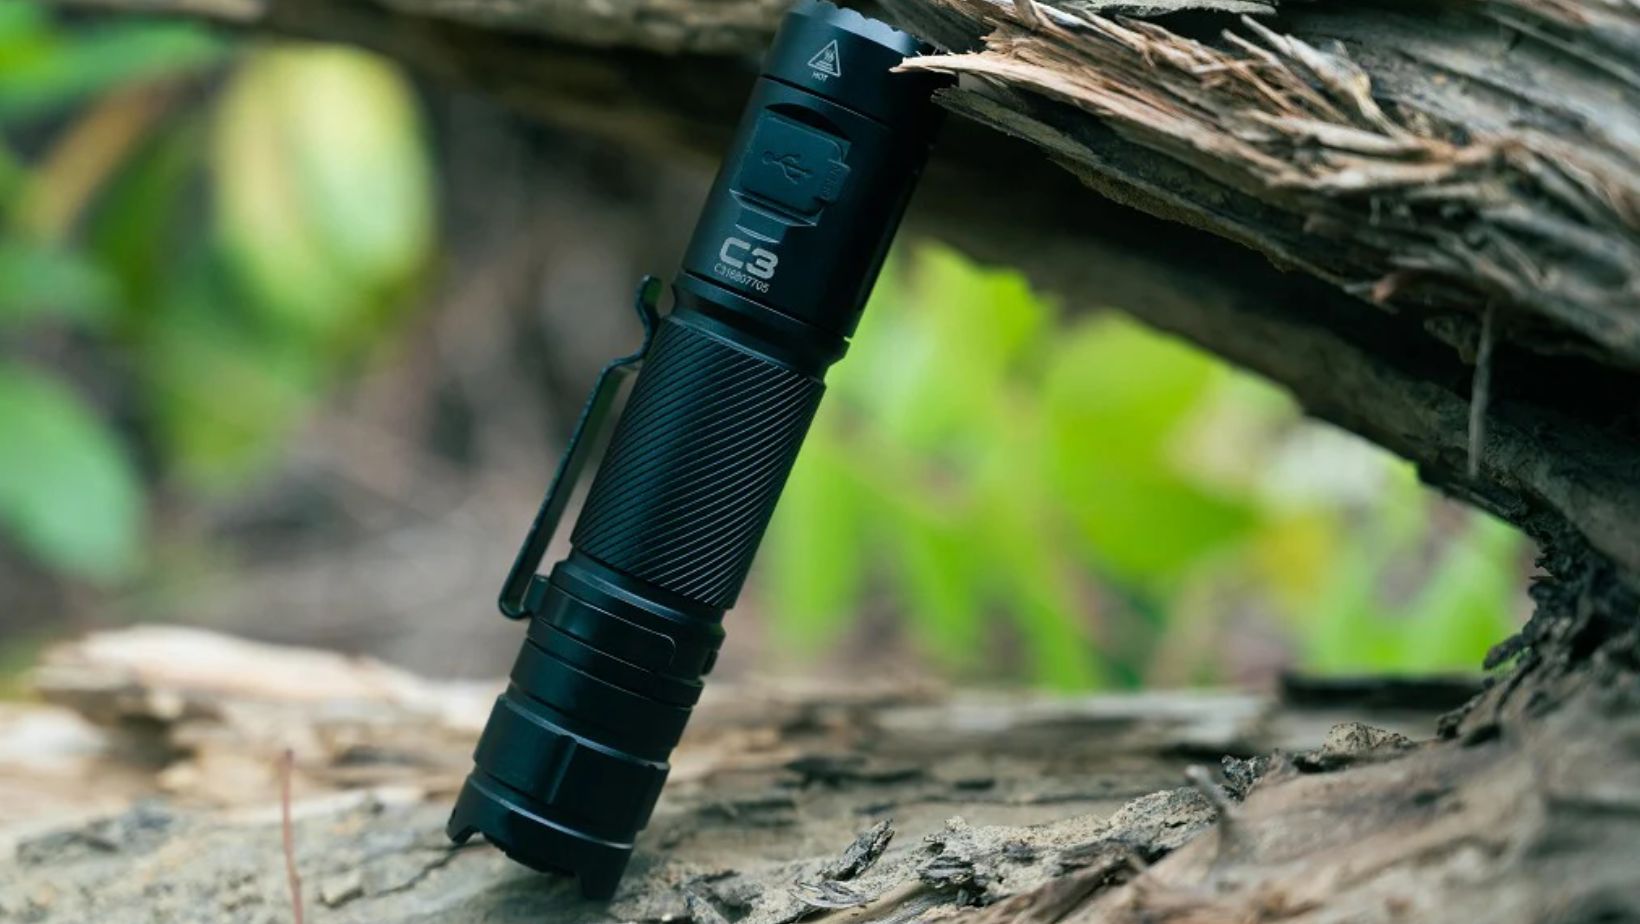 Essential Features of a Quality Flashlight